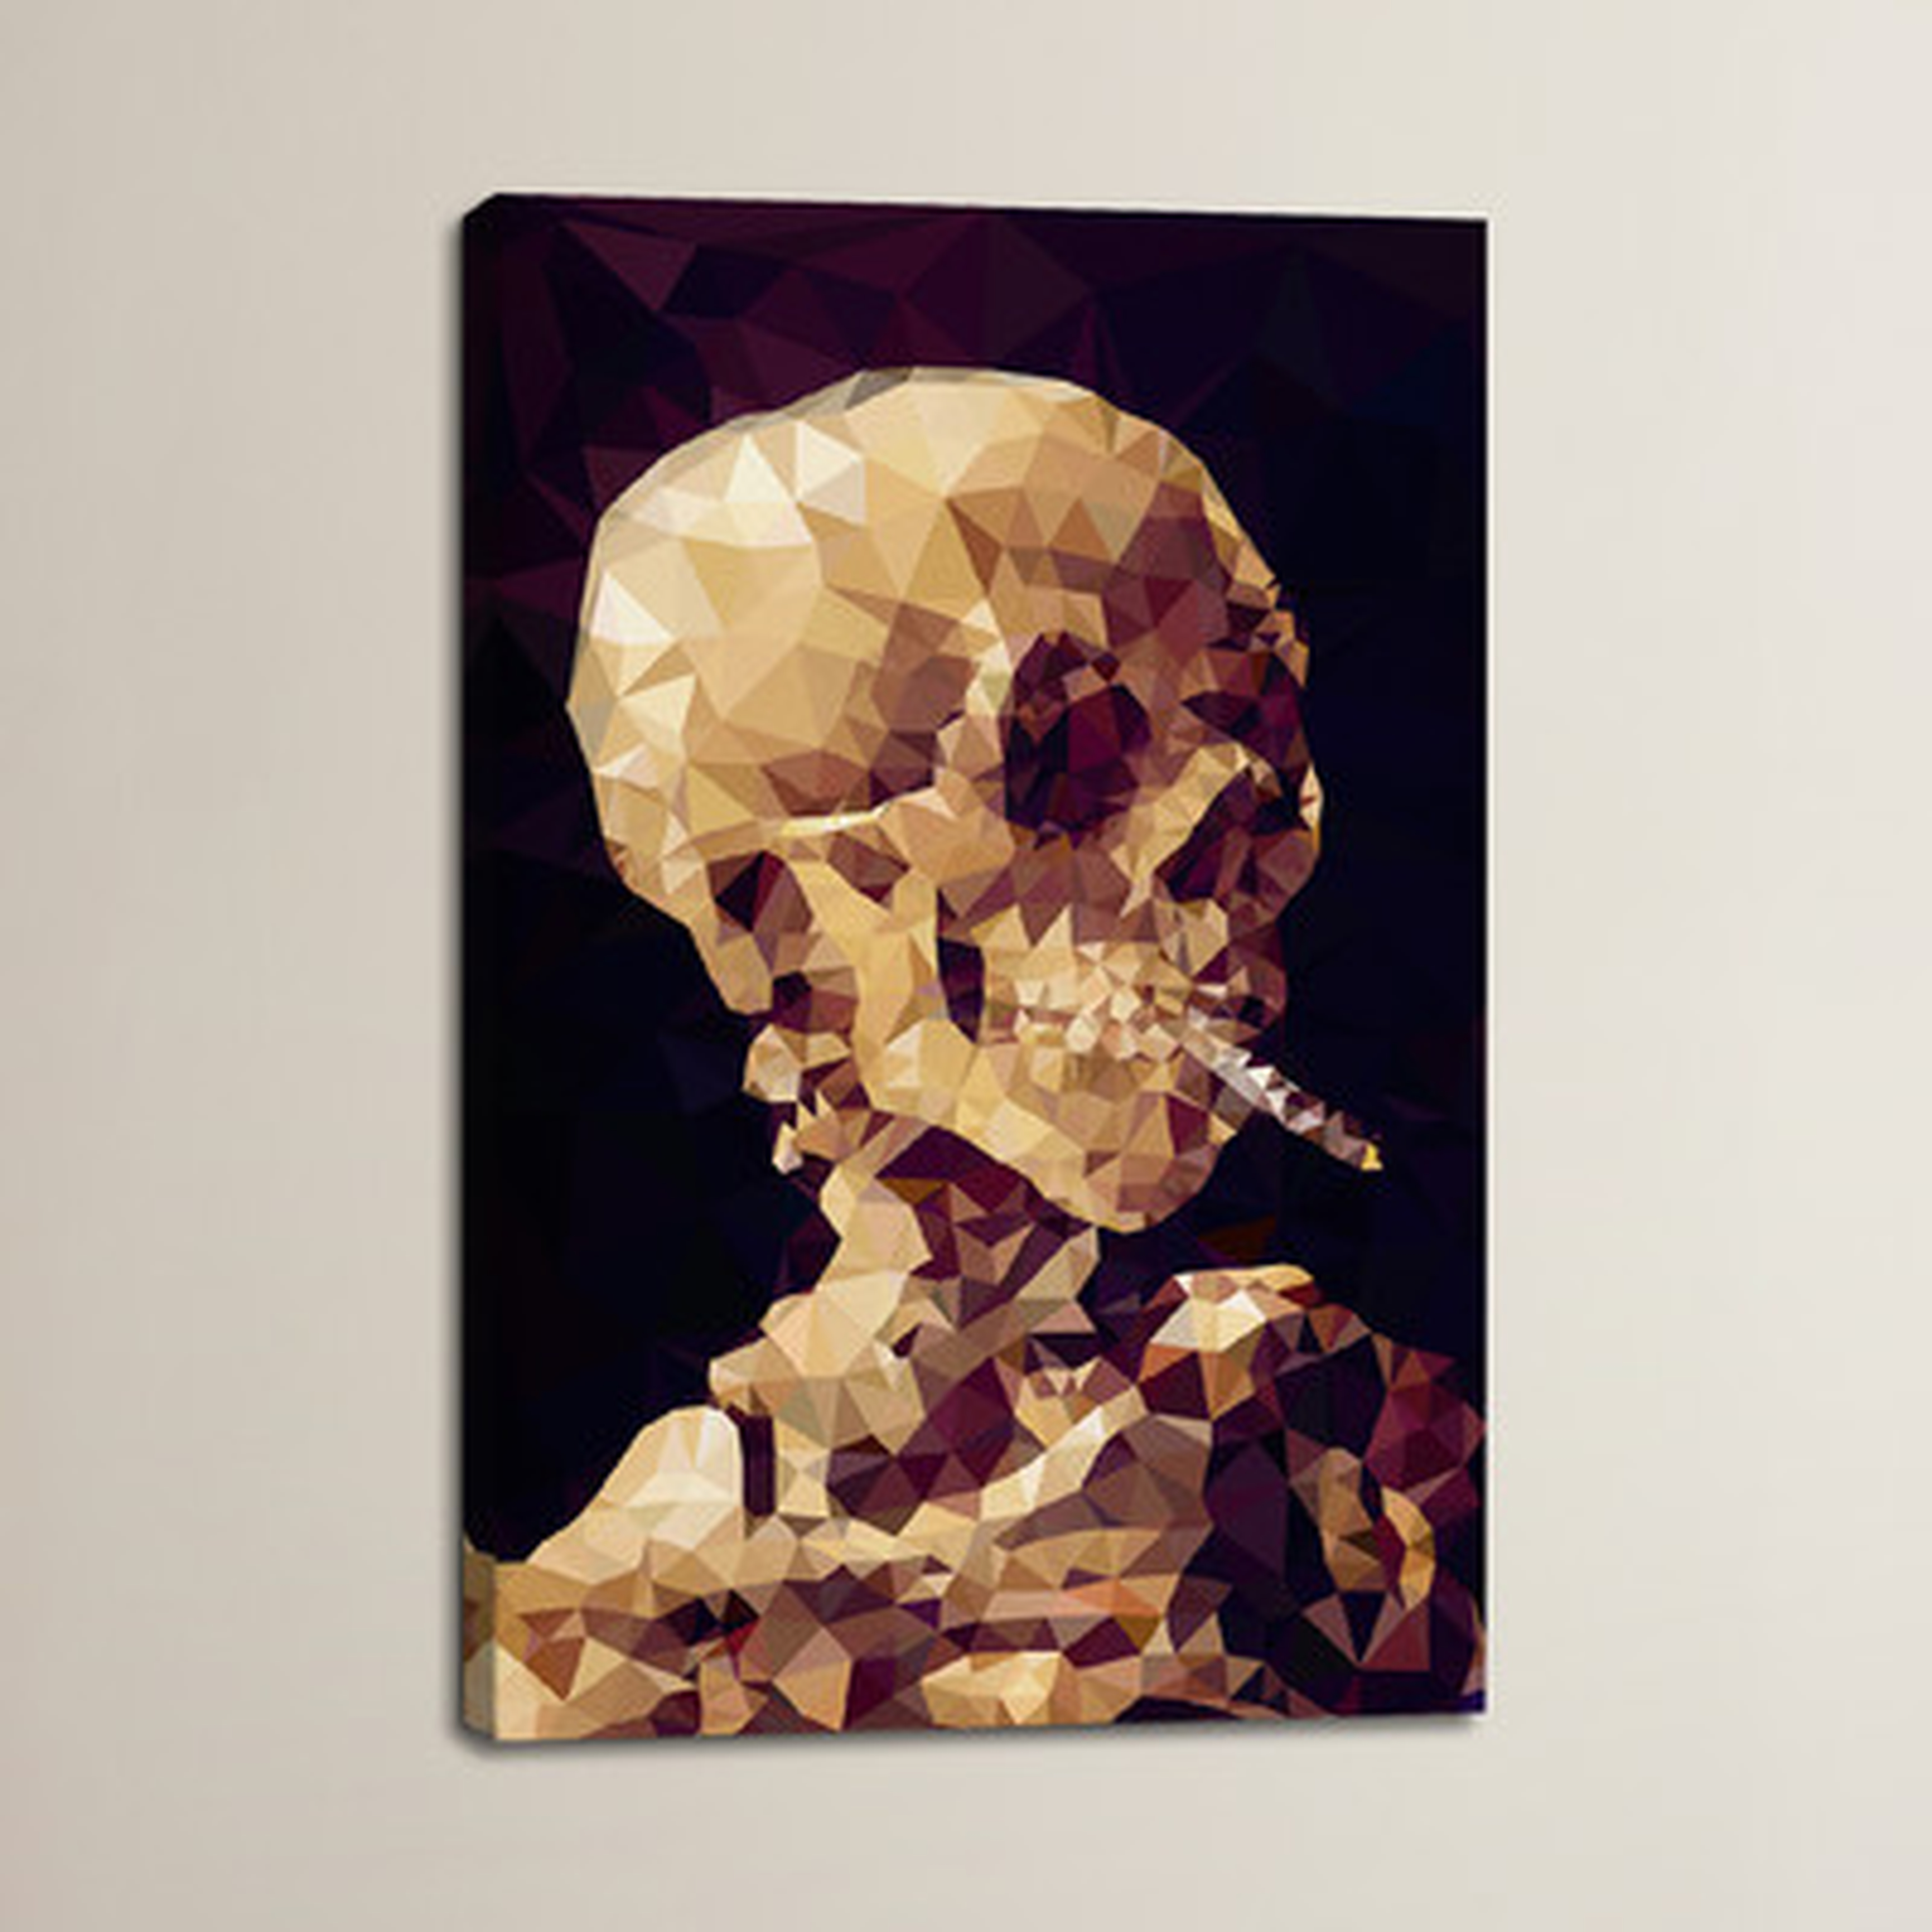 Smoking Skull Derezzed Graphic Art on Wrapped Canvas - Wayfair